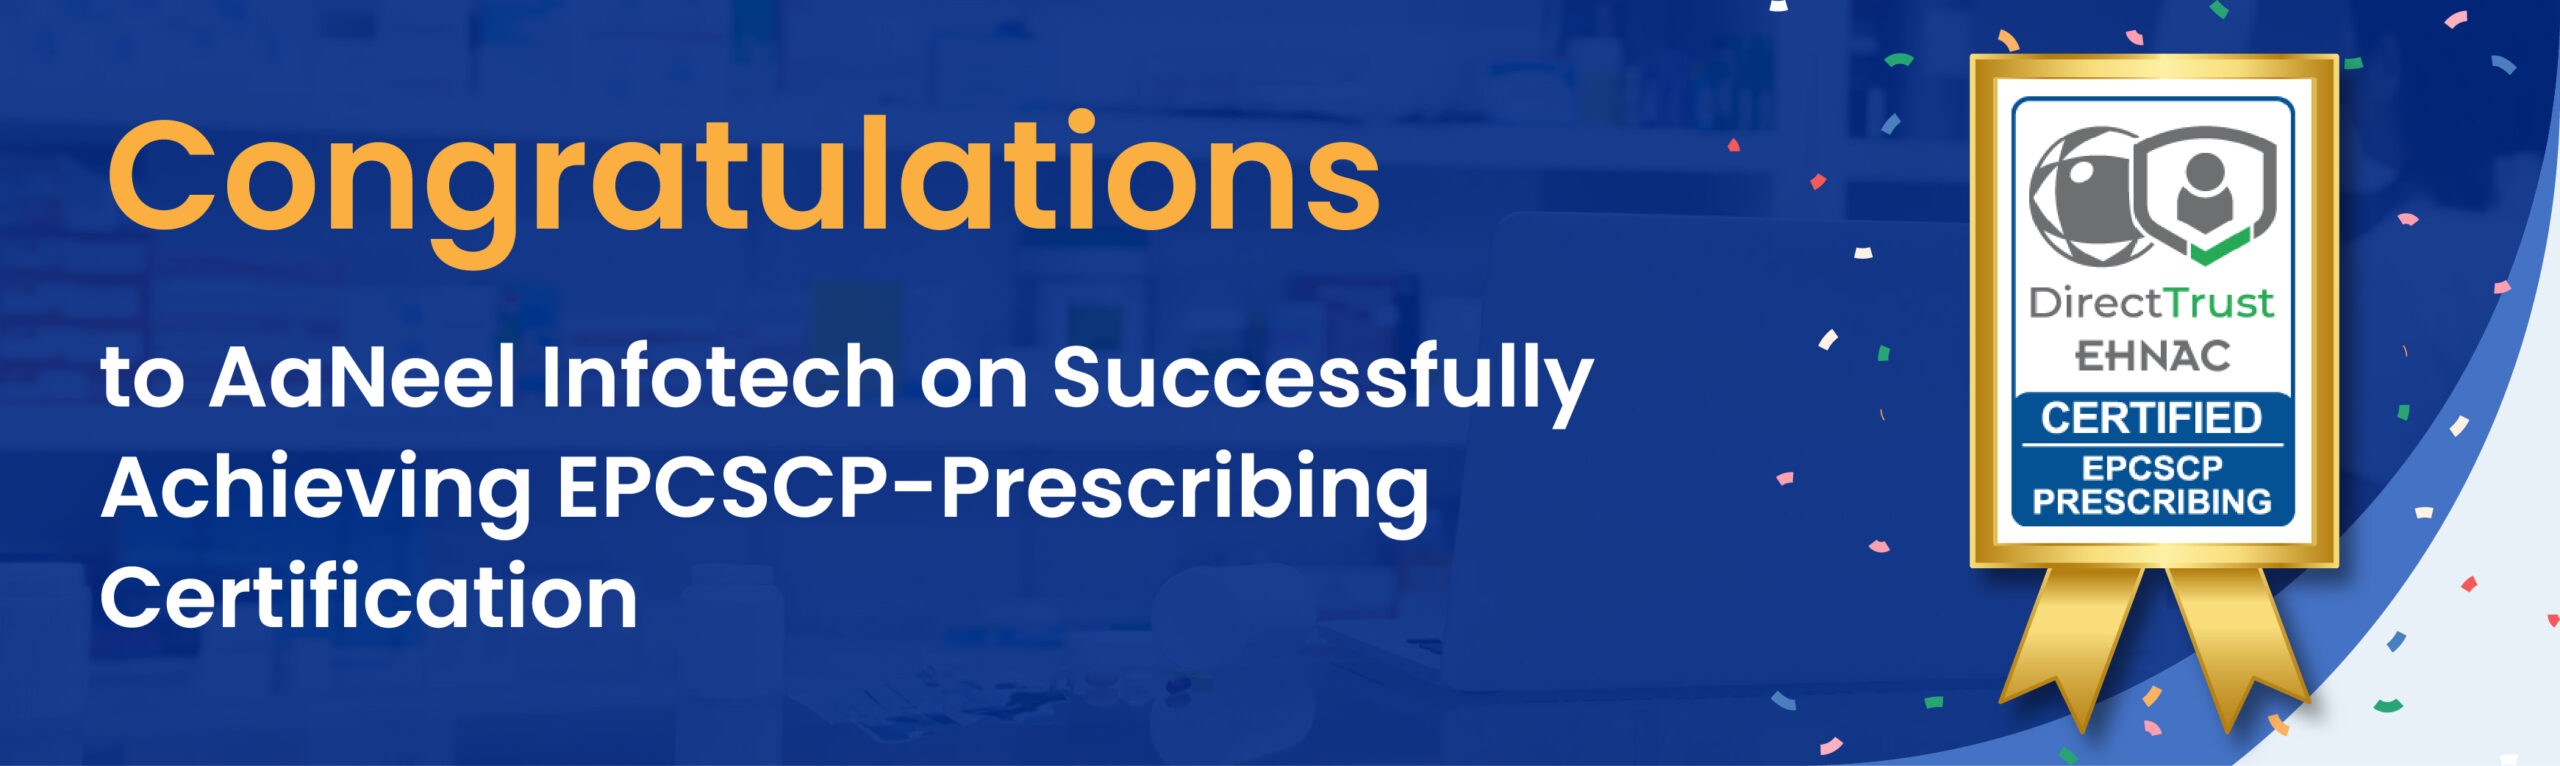 EPCSP-Prescribing Certification-a-without hand-05